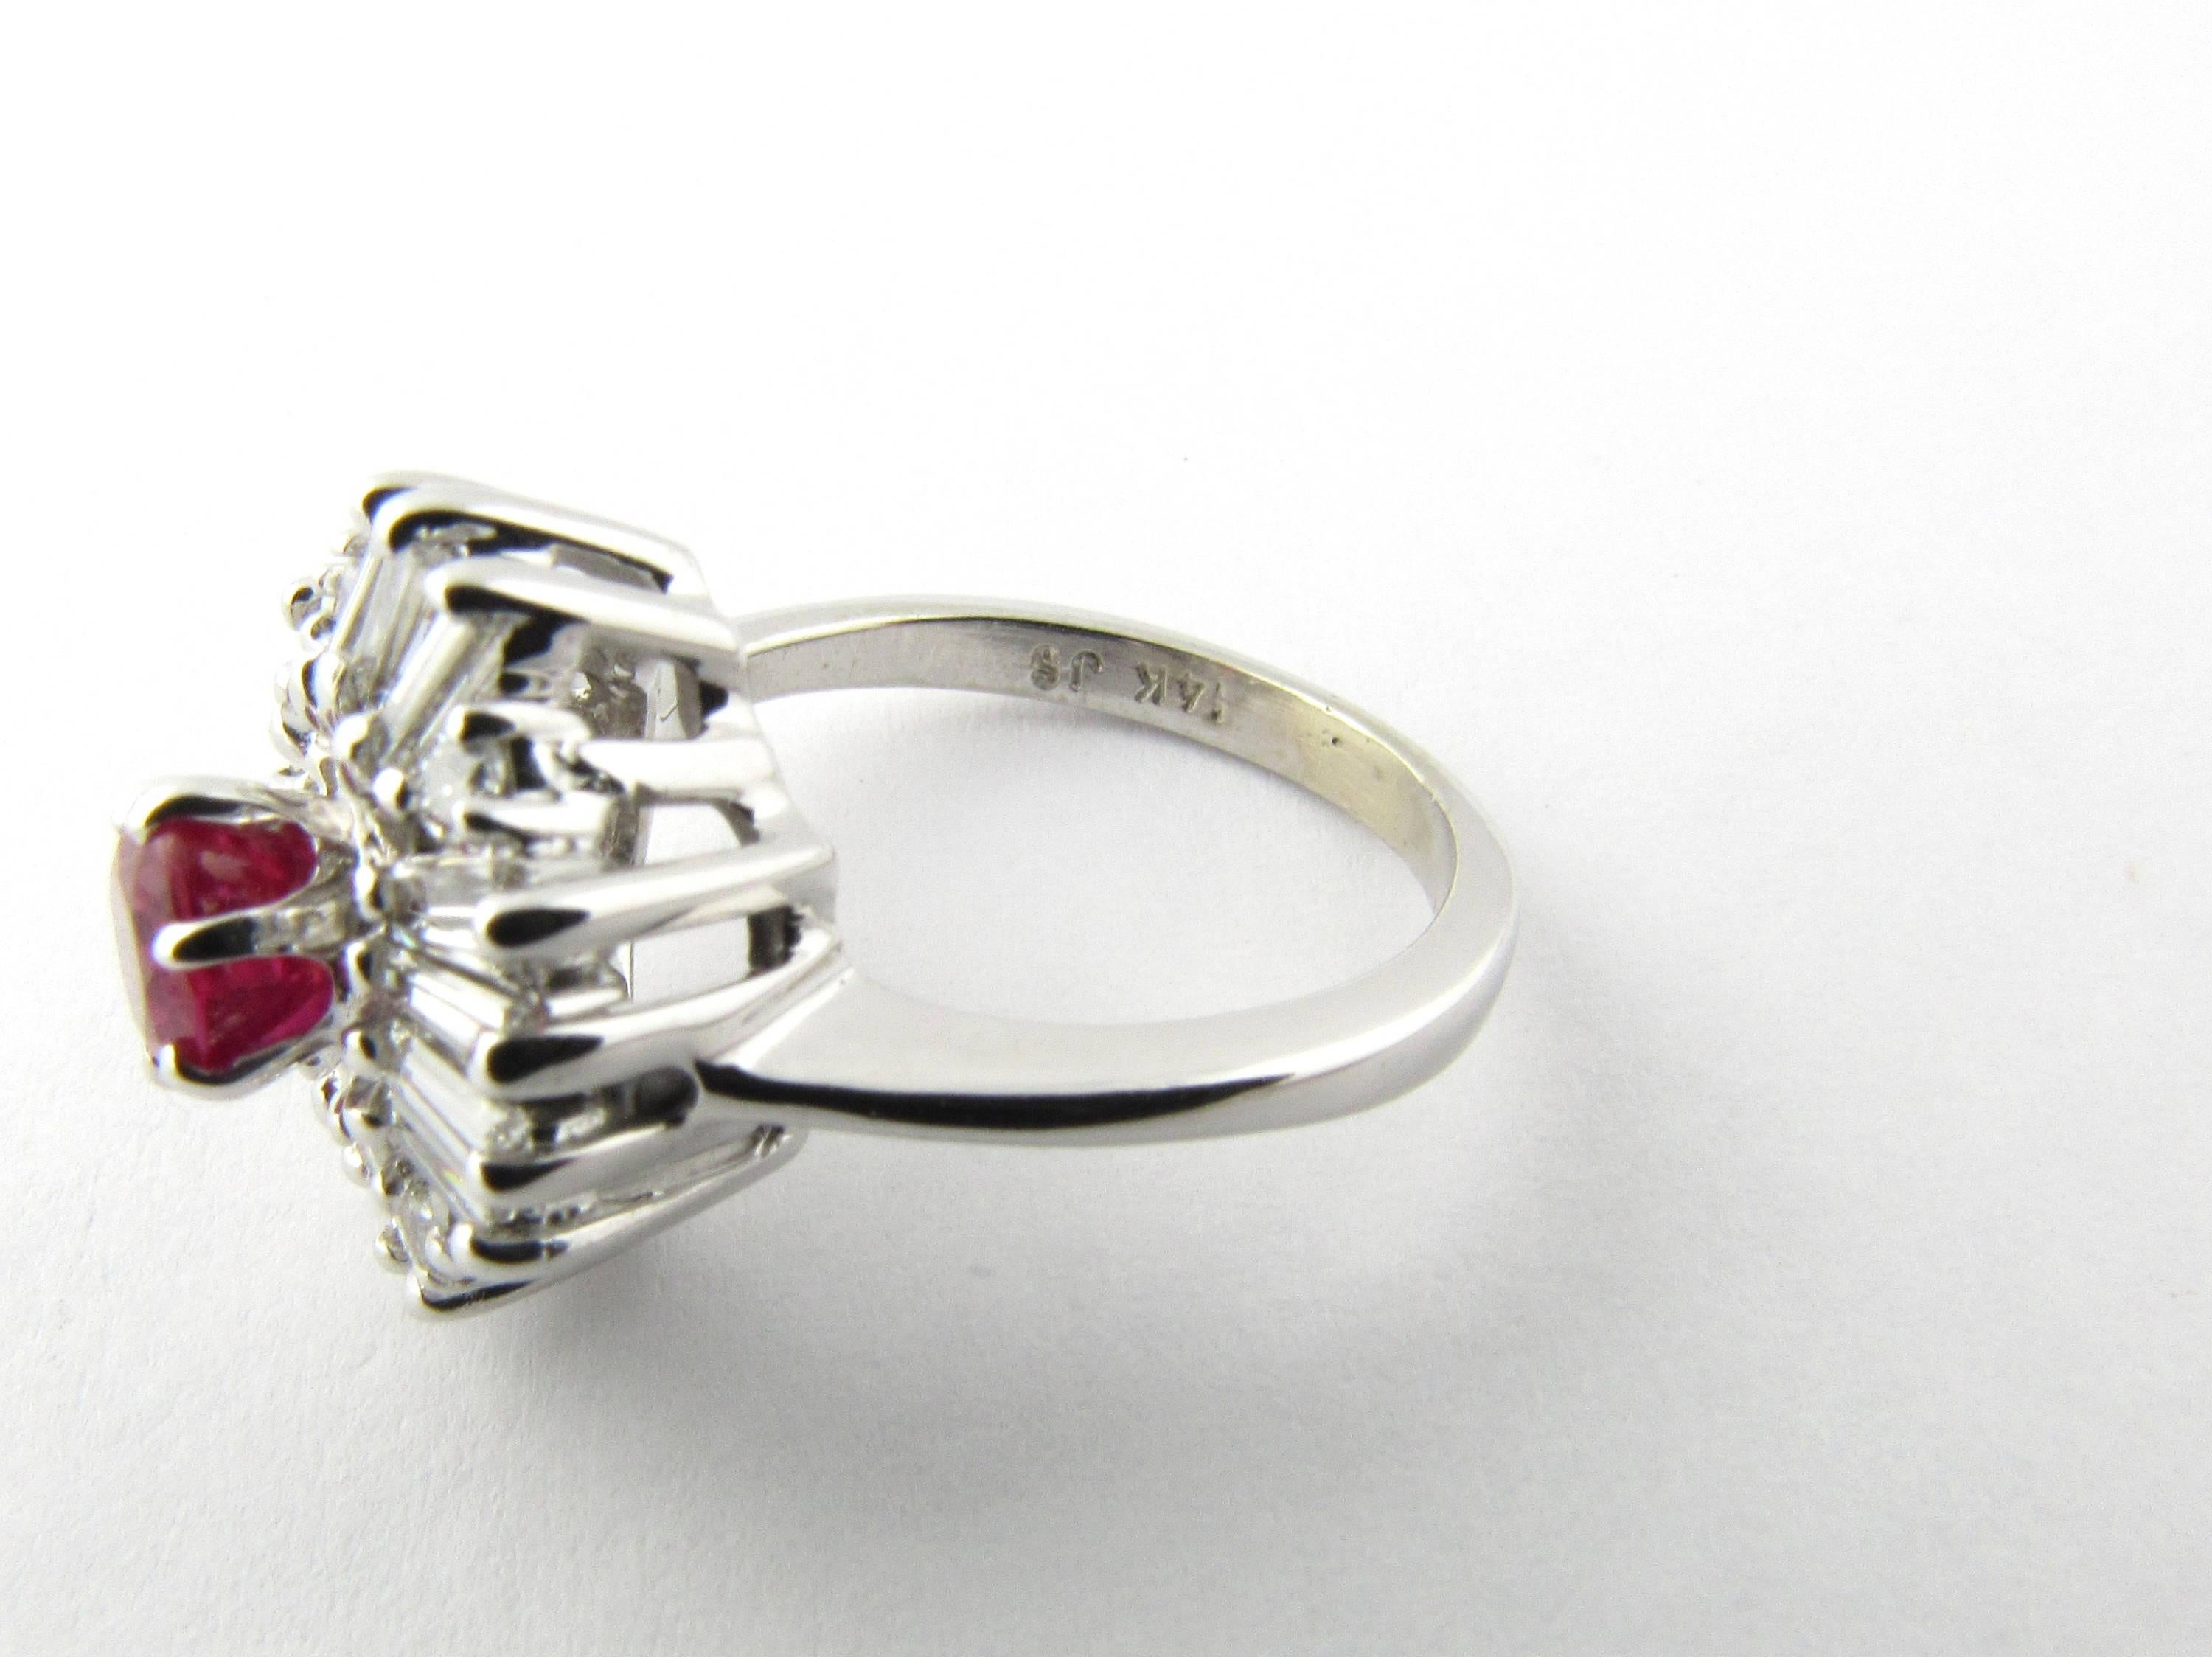 Vintage 14 Karat White Gold Ruby and Diamond Ring Size 4-

This stunning ring features one round genuine Ruby (5 mm) surrounded by 14 baguette diamonds and four round brilliant cut diamonds set in 14K white gold.

Top of ring measures 14